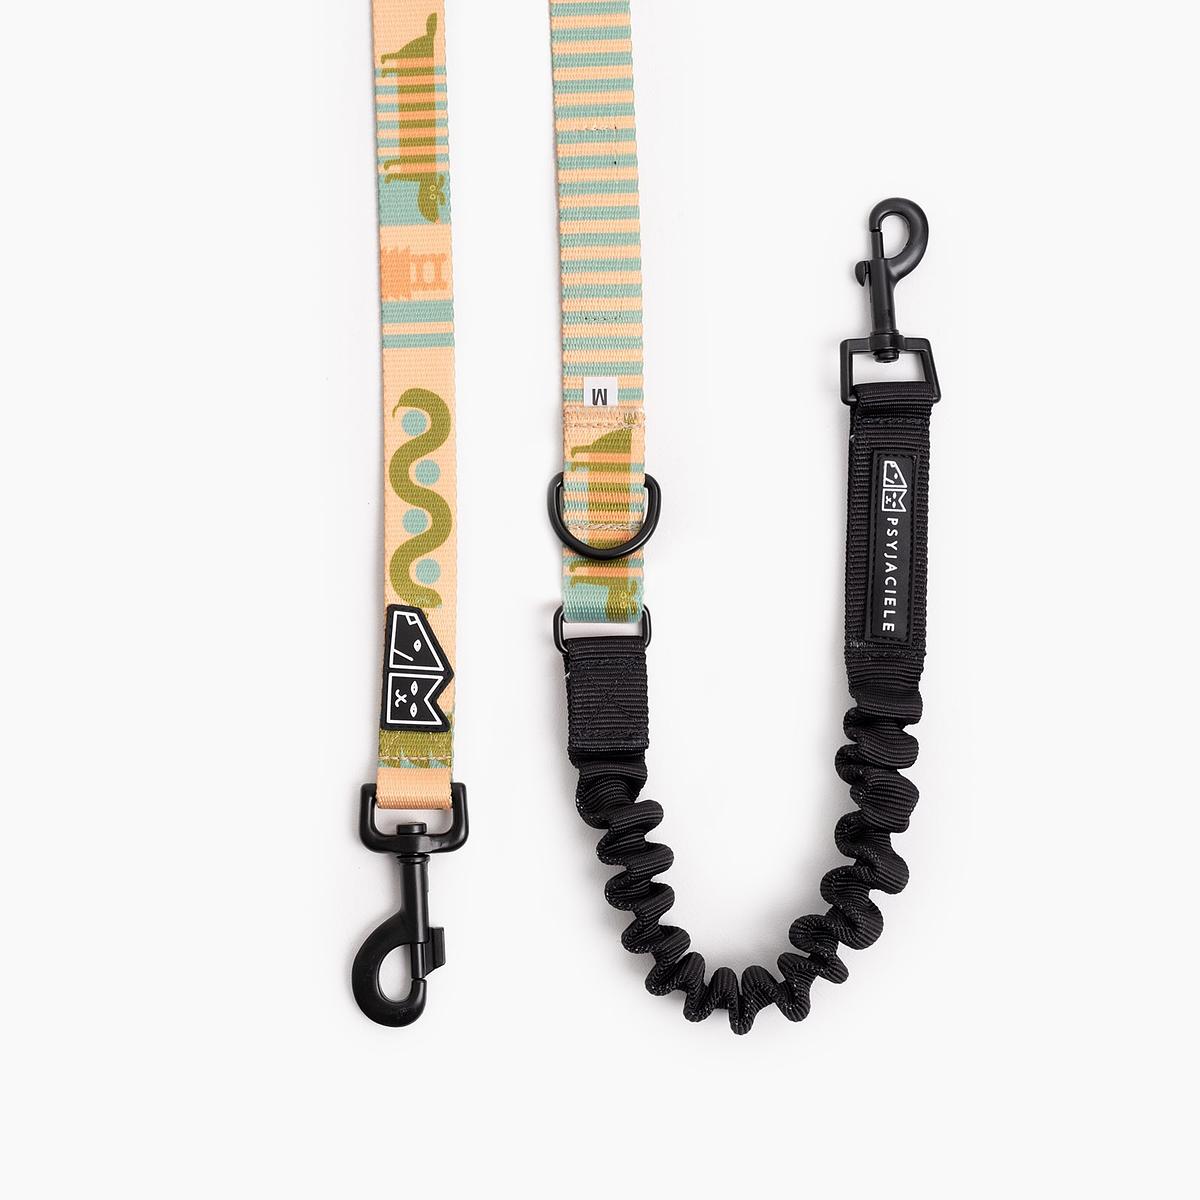 "Sausage dog" leash with a shock absorber